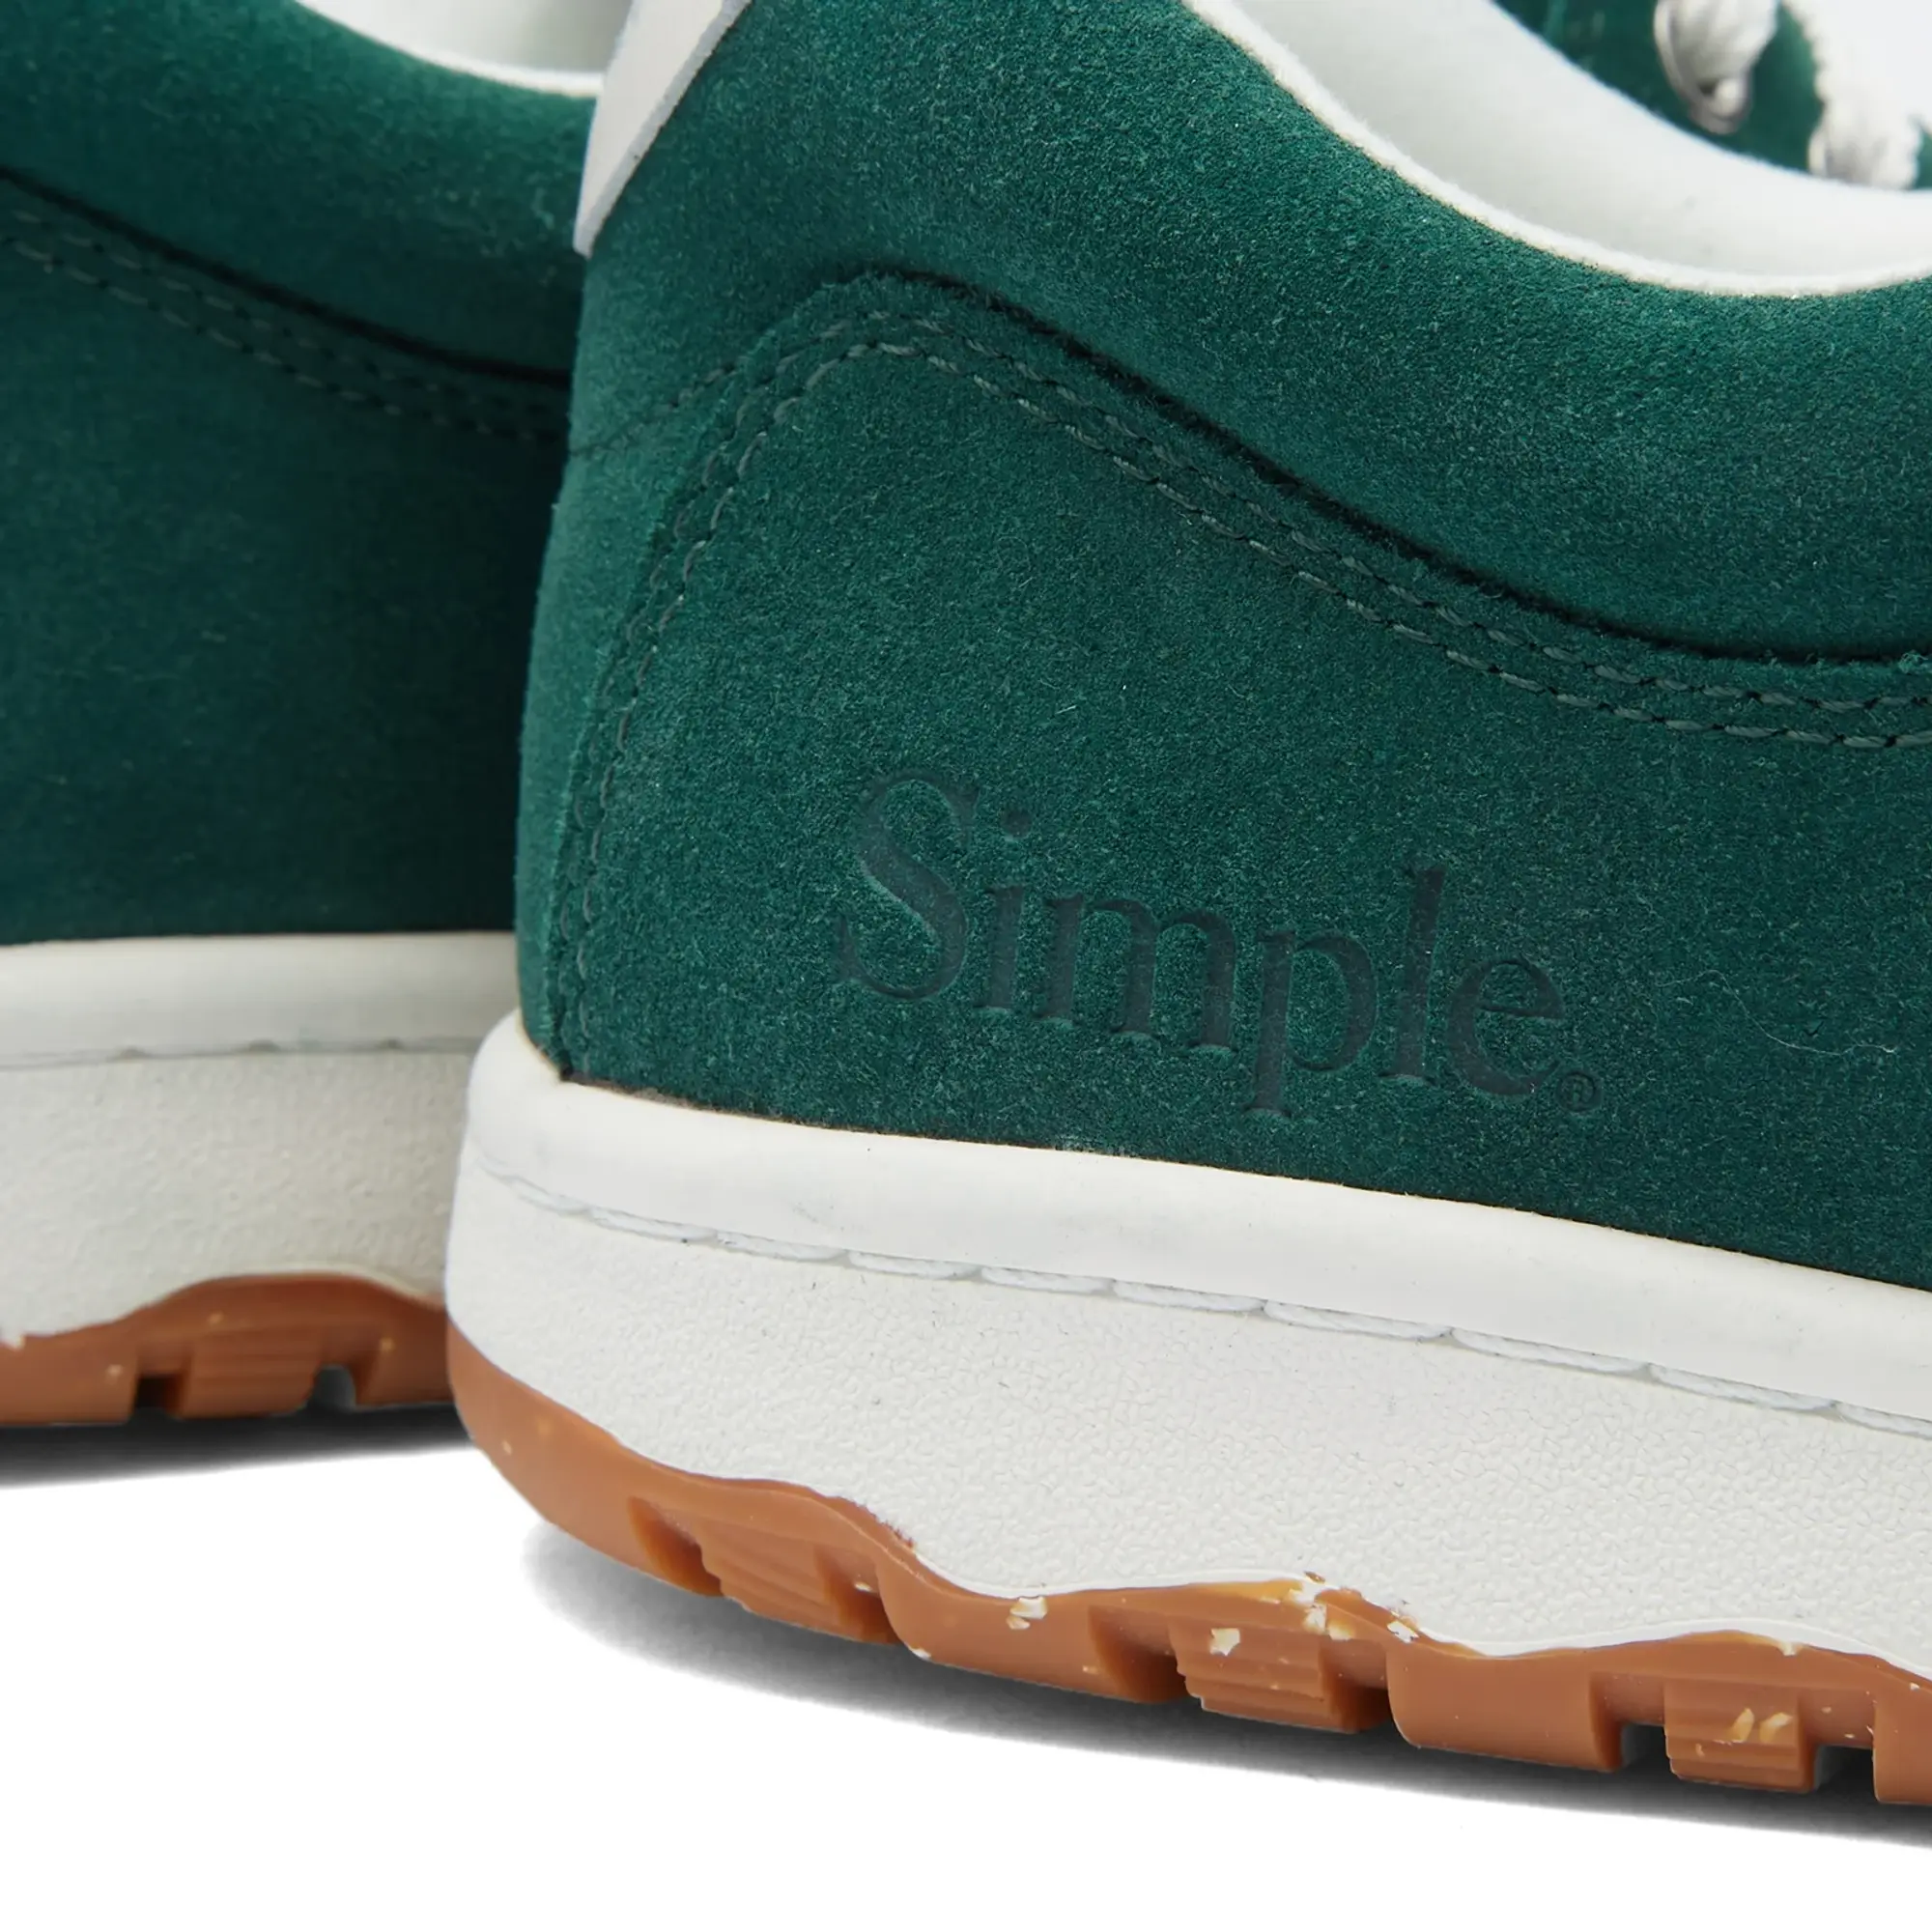 Simple Men's OS Standard Issue Forest Green